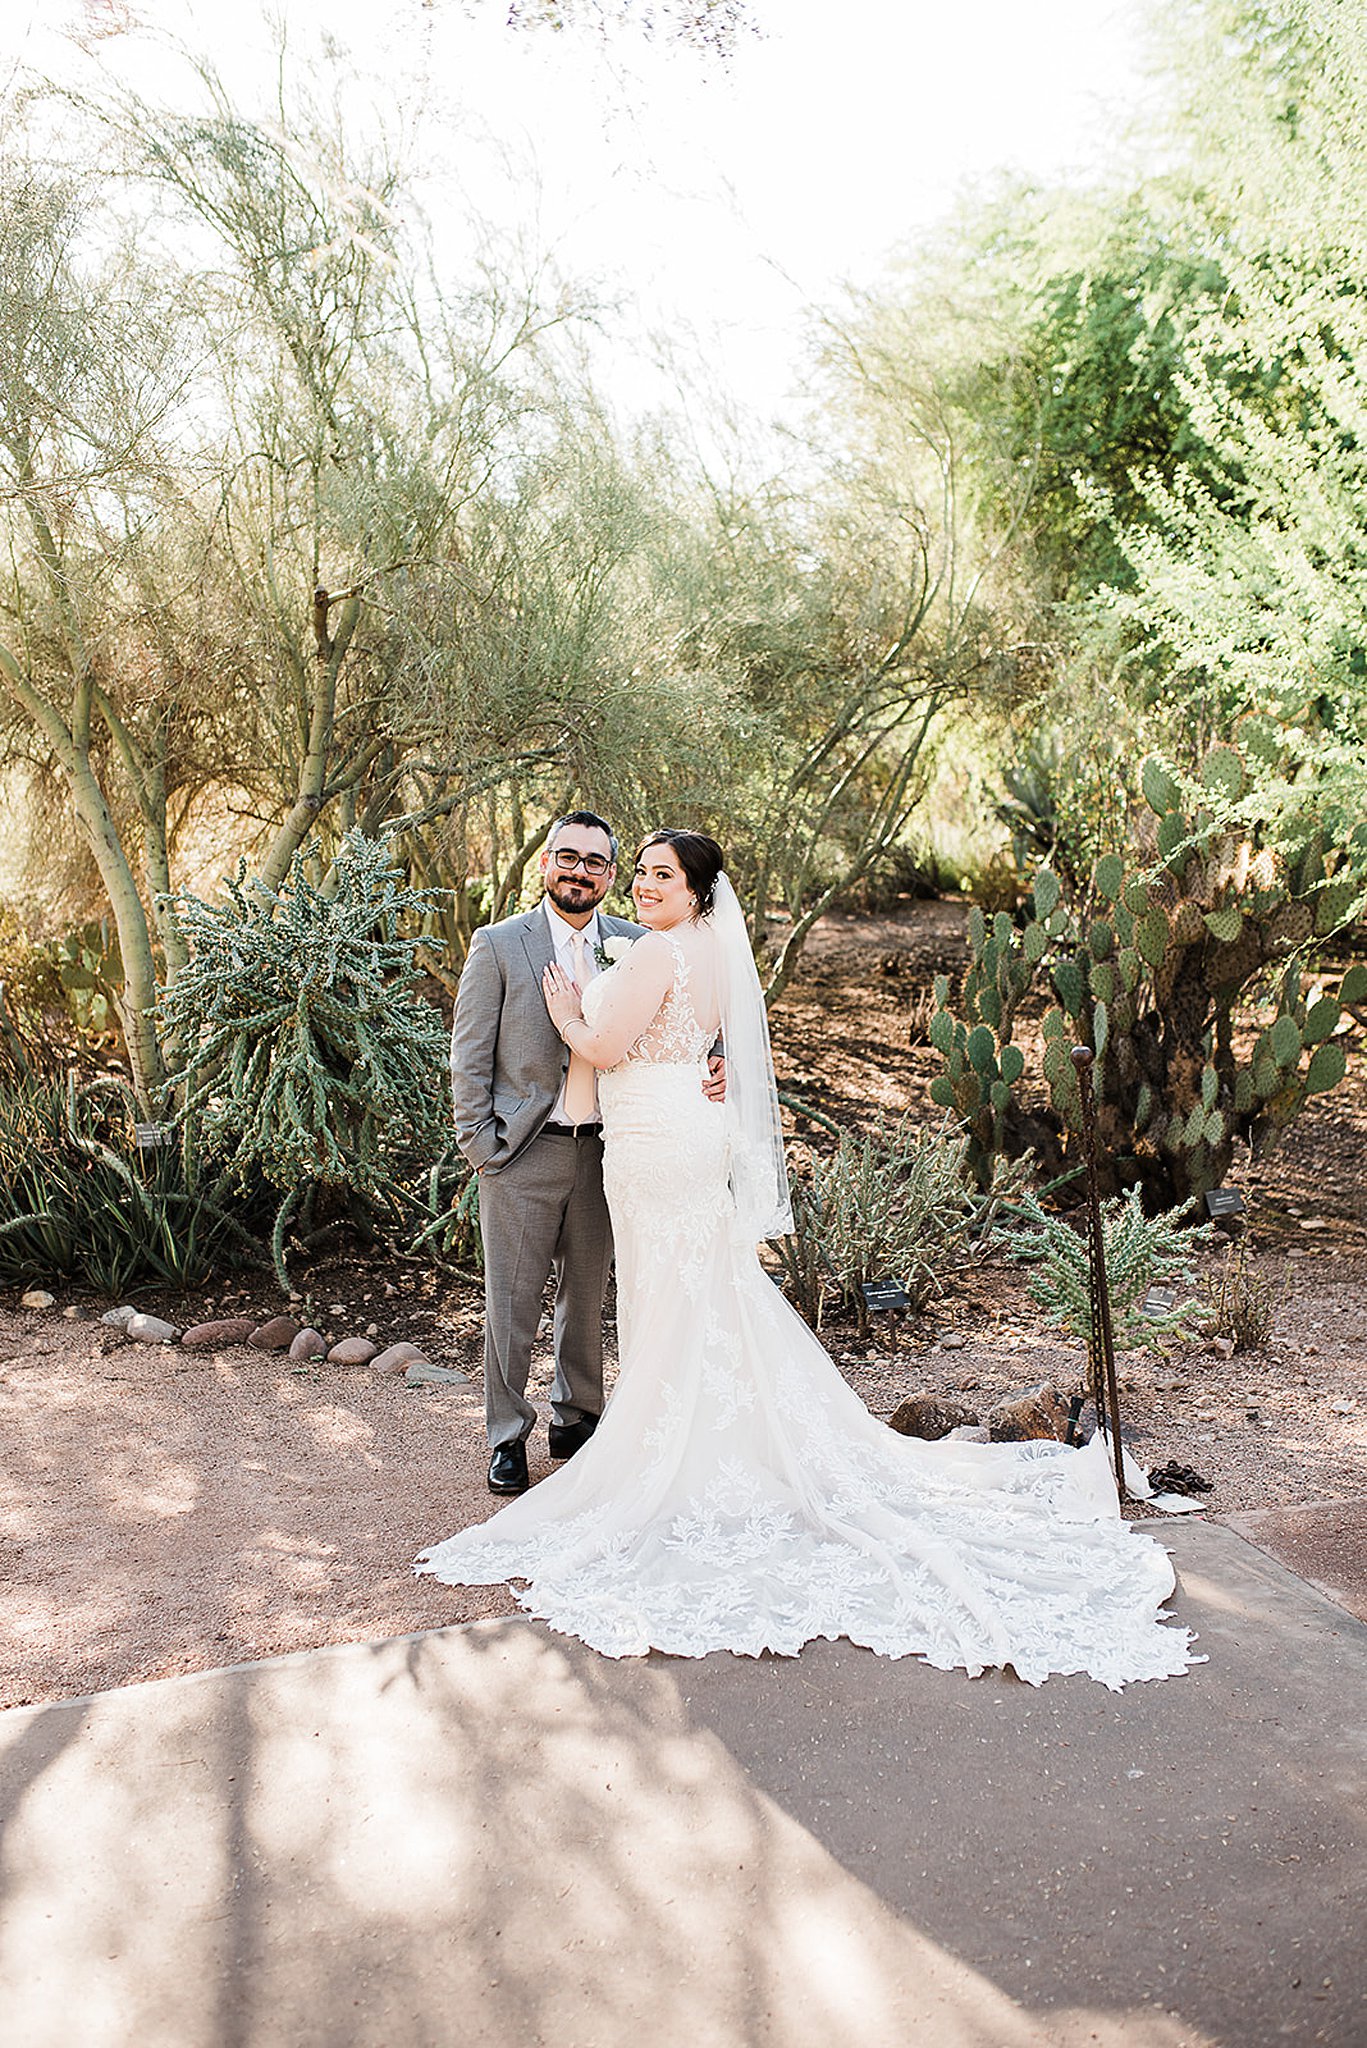 bride and groom embracing each other at their desert botanical gardens wedding